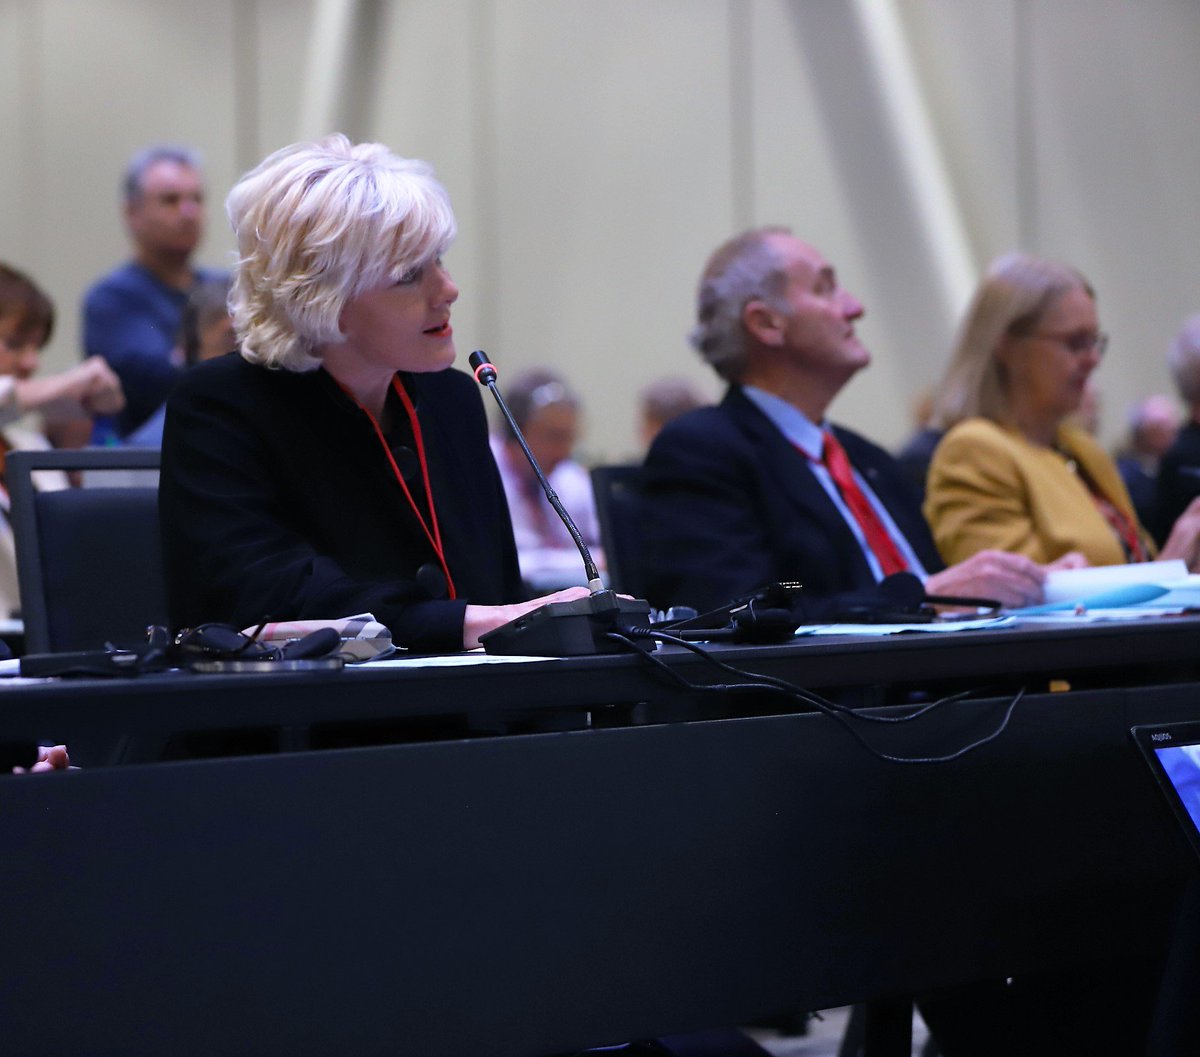 #CANA’s @cherylgallant during the question and answer session on Minister of National Defence, @HarjitSajjan’s address during the 64th Annual Session of the @natopapress in Halifax, Canada #NATOPAHalifax